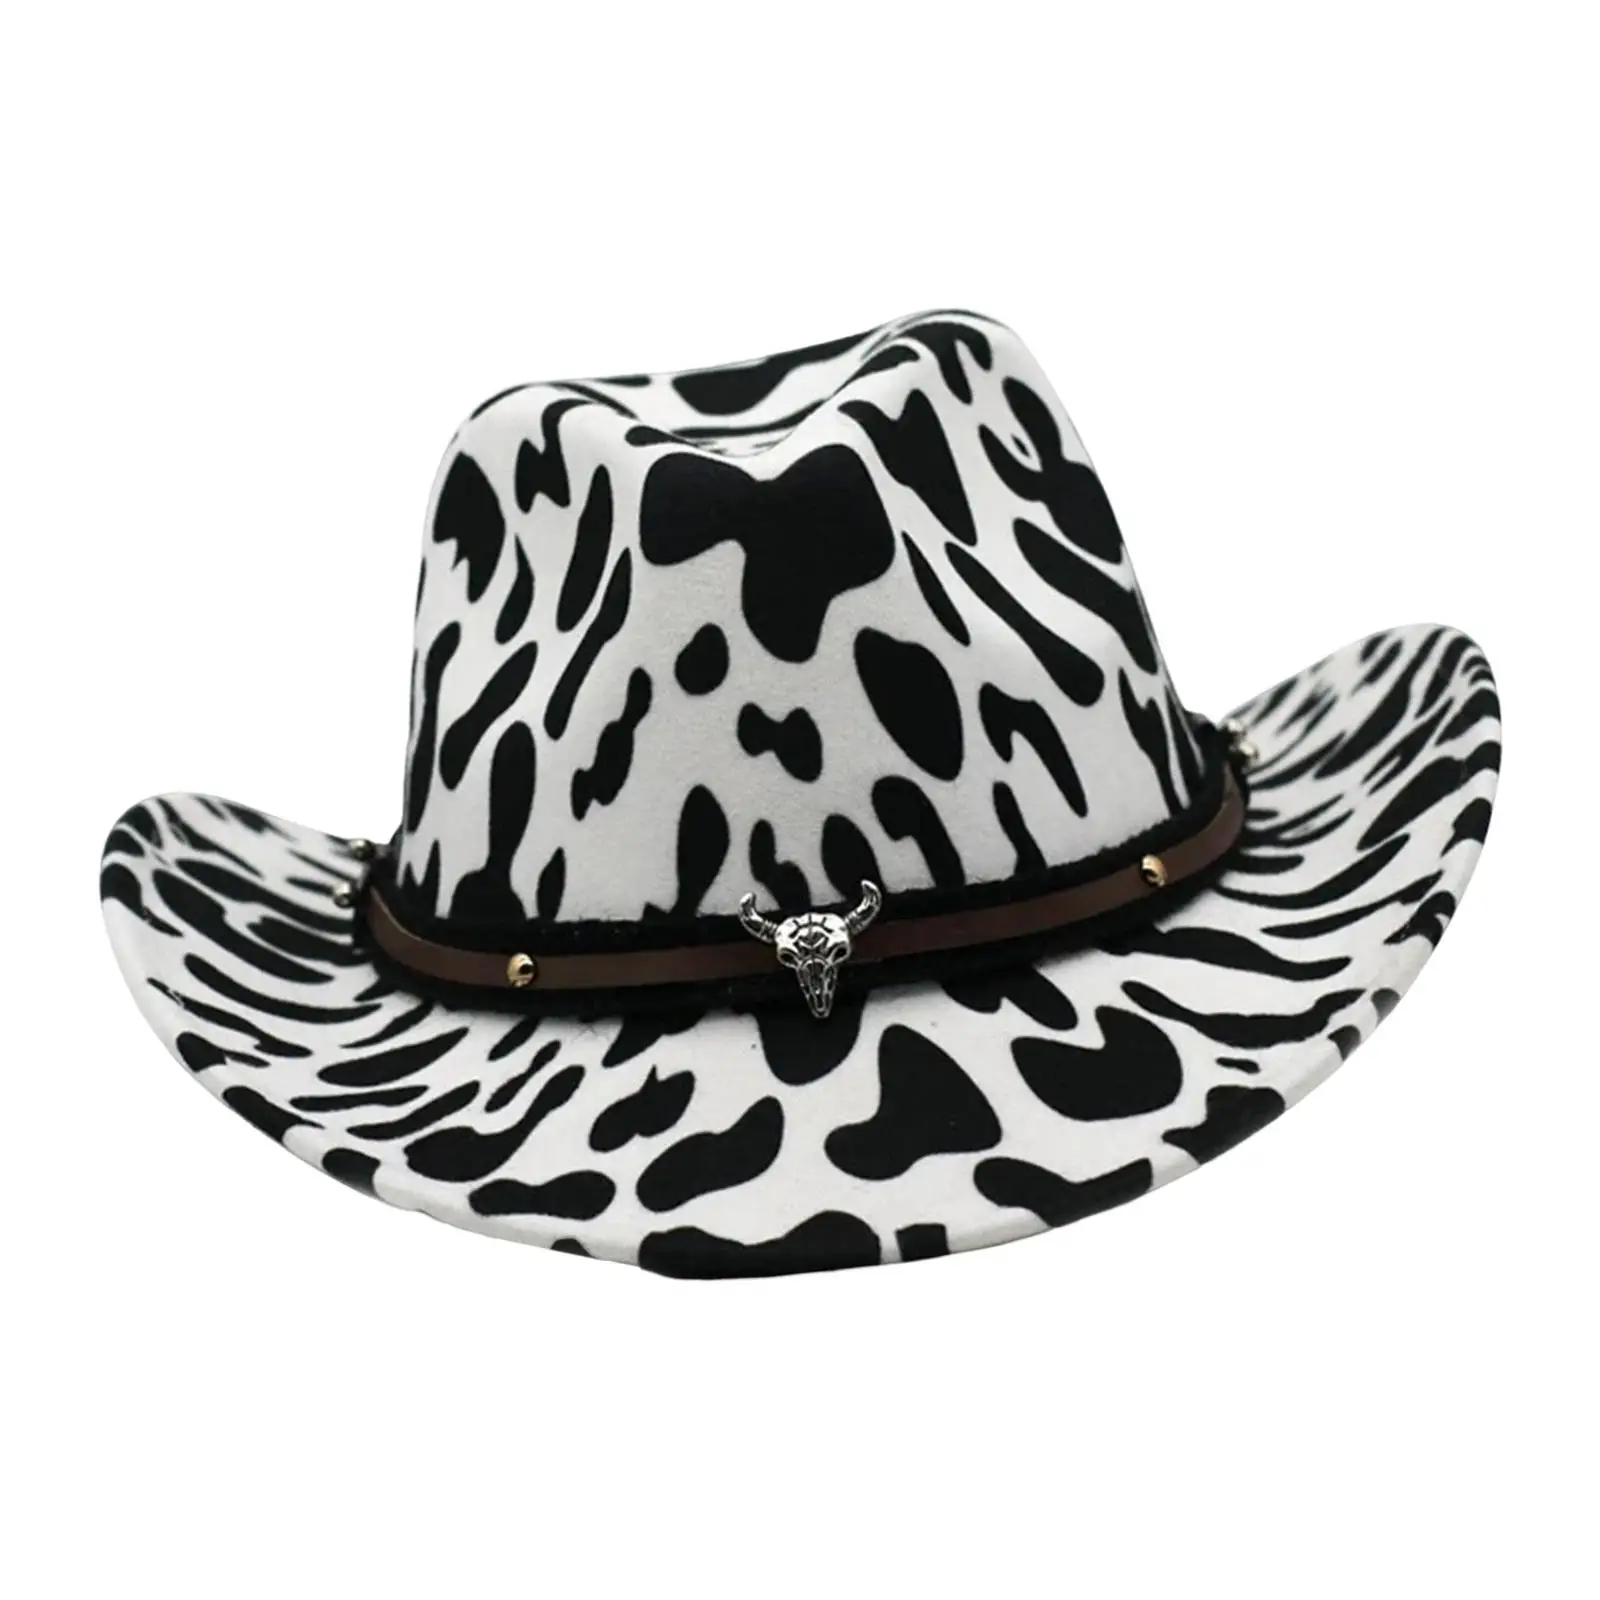 Fashion Western Cowboy Hat Dress Sun Hat Women Men Wide Brim for Party Costume Holiday Camping Travel